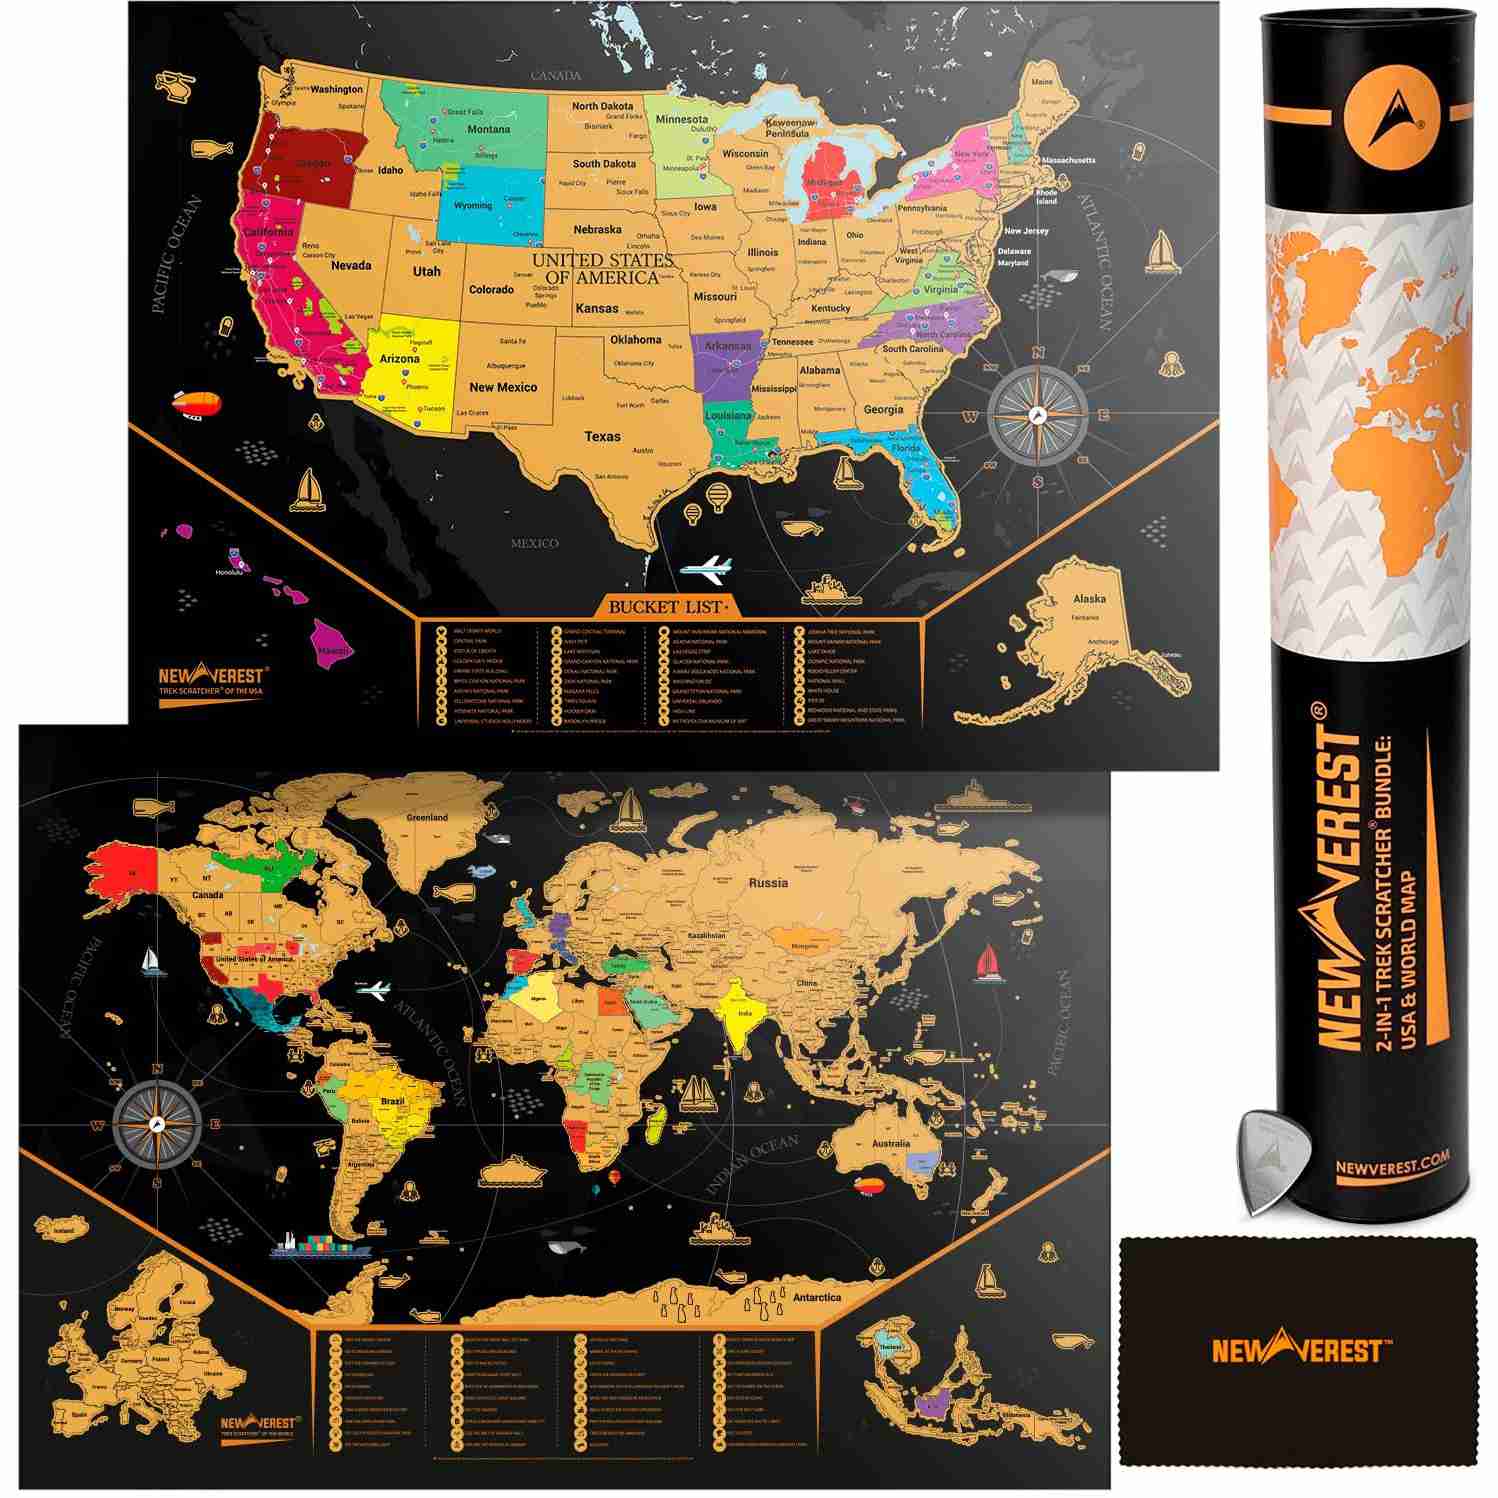 scratch-off-map-of-the-usa-world-travel-poster with cash back rebate